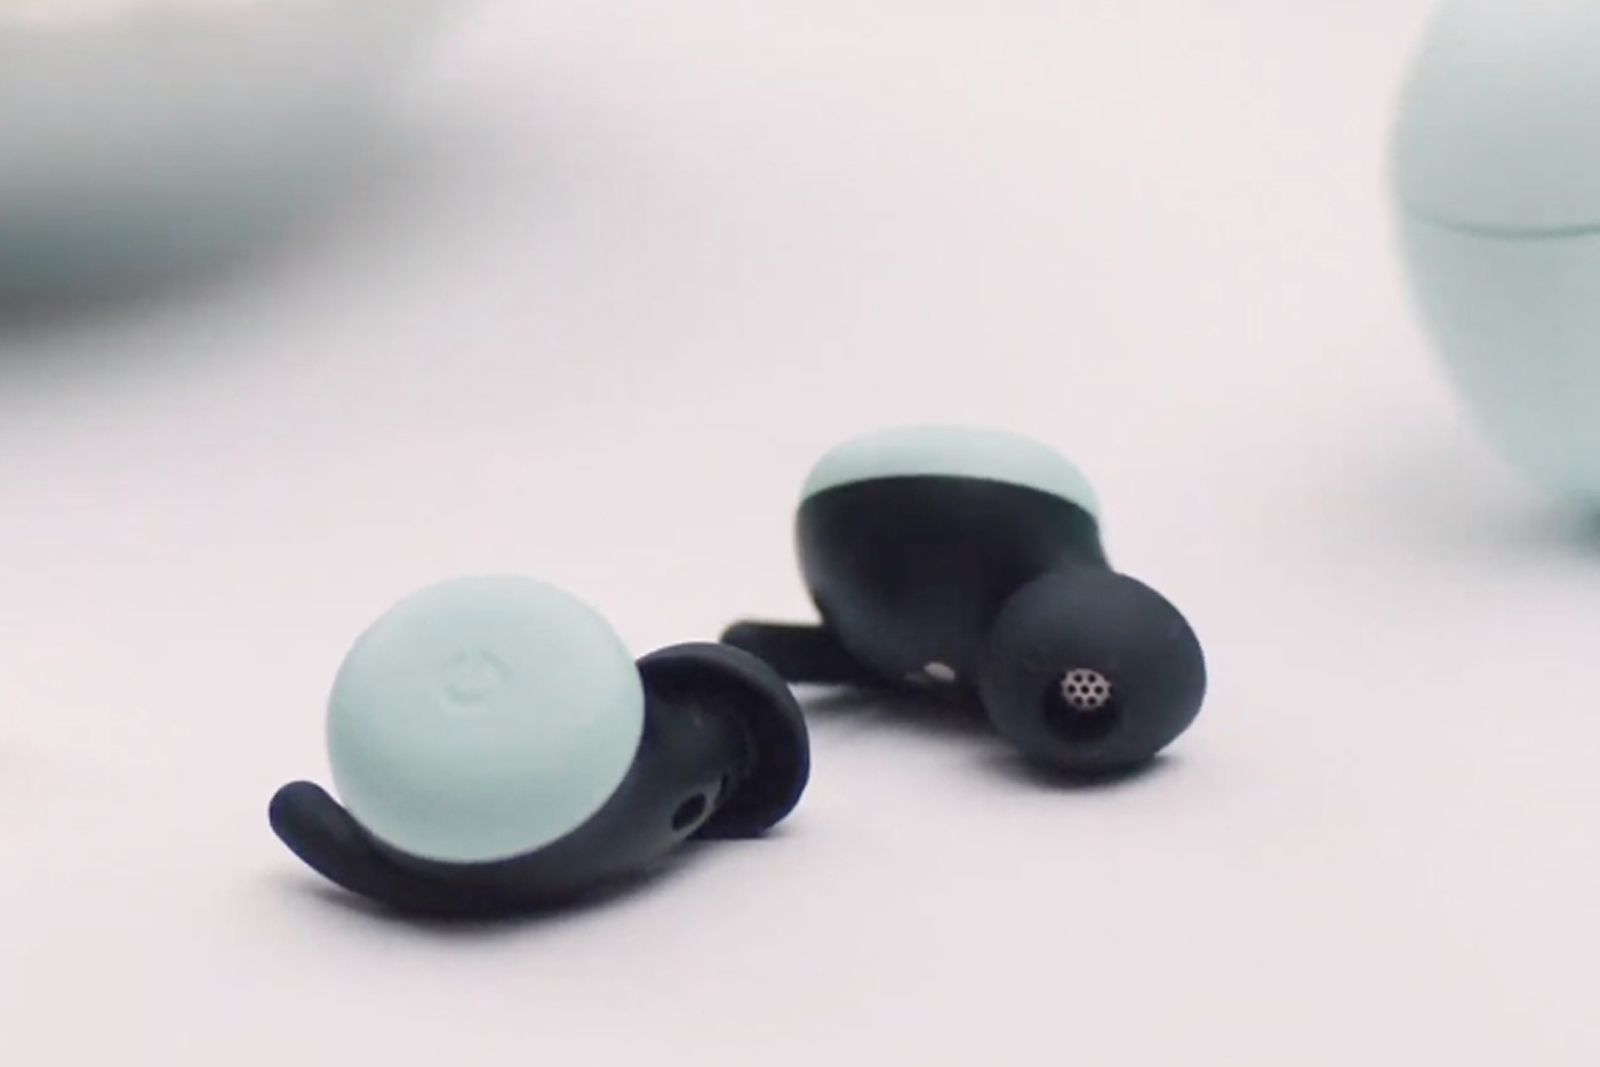 All-new Pixel Buds have long-range connection better sound and hands-free assistant image 1